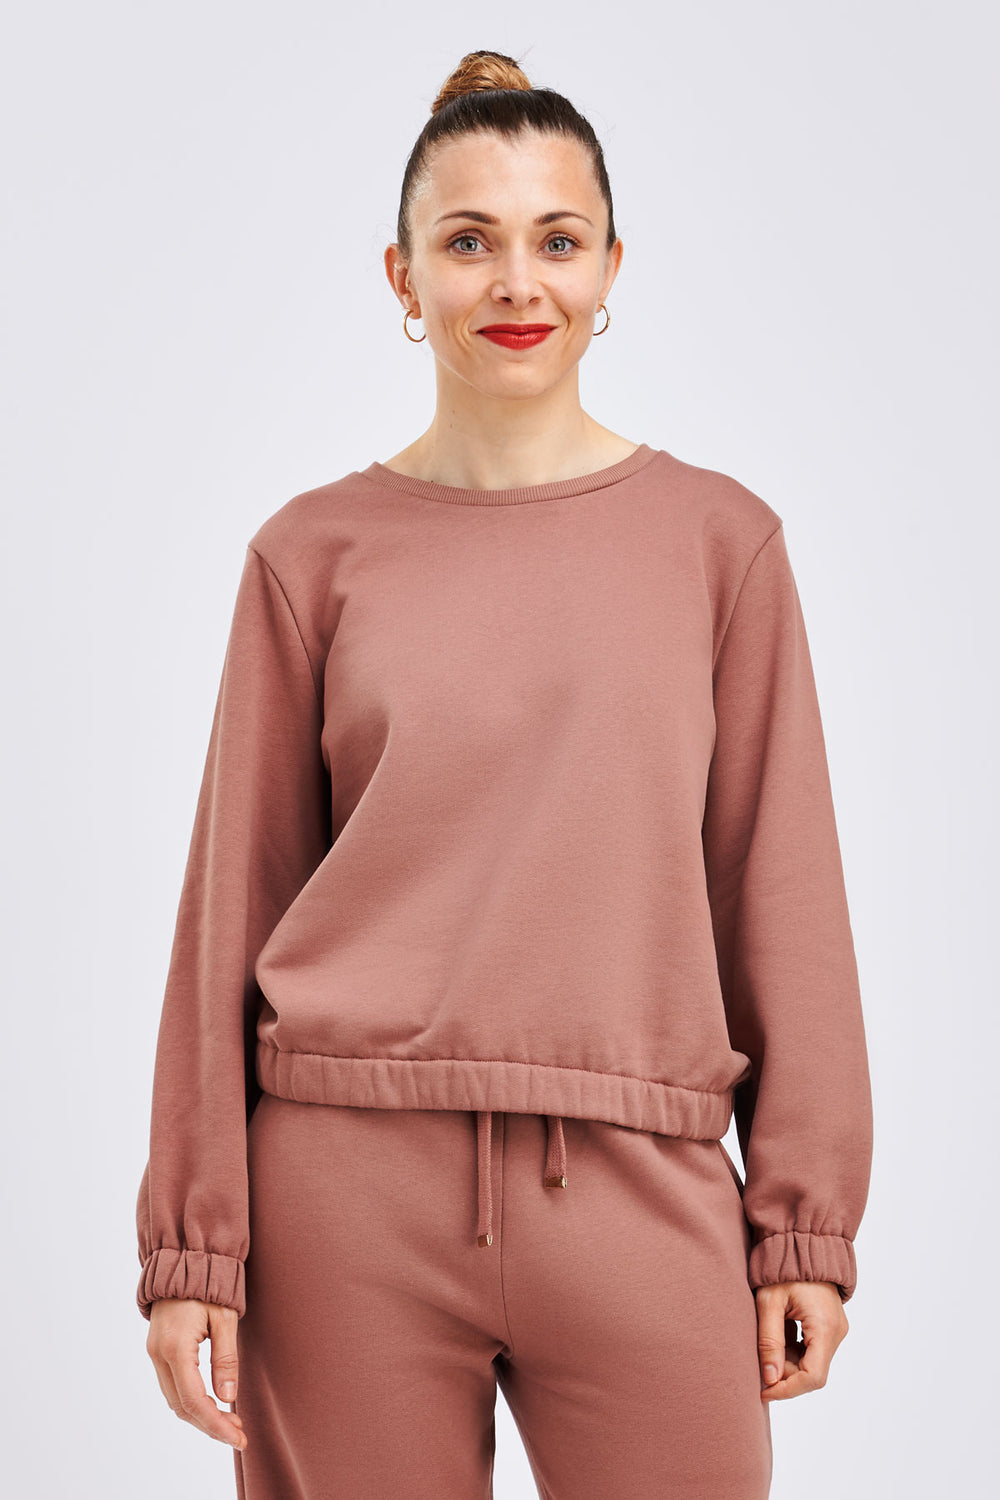 Woman wearing the Baloo Sweatshirt sewing pattern from I AM Patterns on The Fold Line. A sweatshirt pattern made in jersey, sweatshirting, scuba, French terry, or milano jersey fabrics, featuring a relaxed fit, round neck, high hip length with elasticated